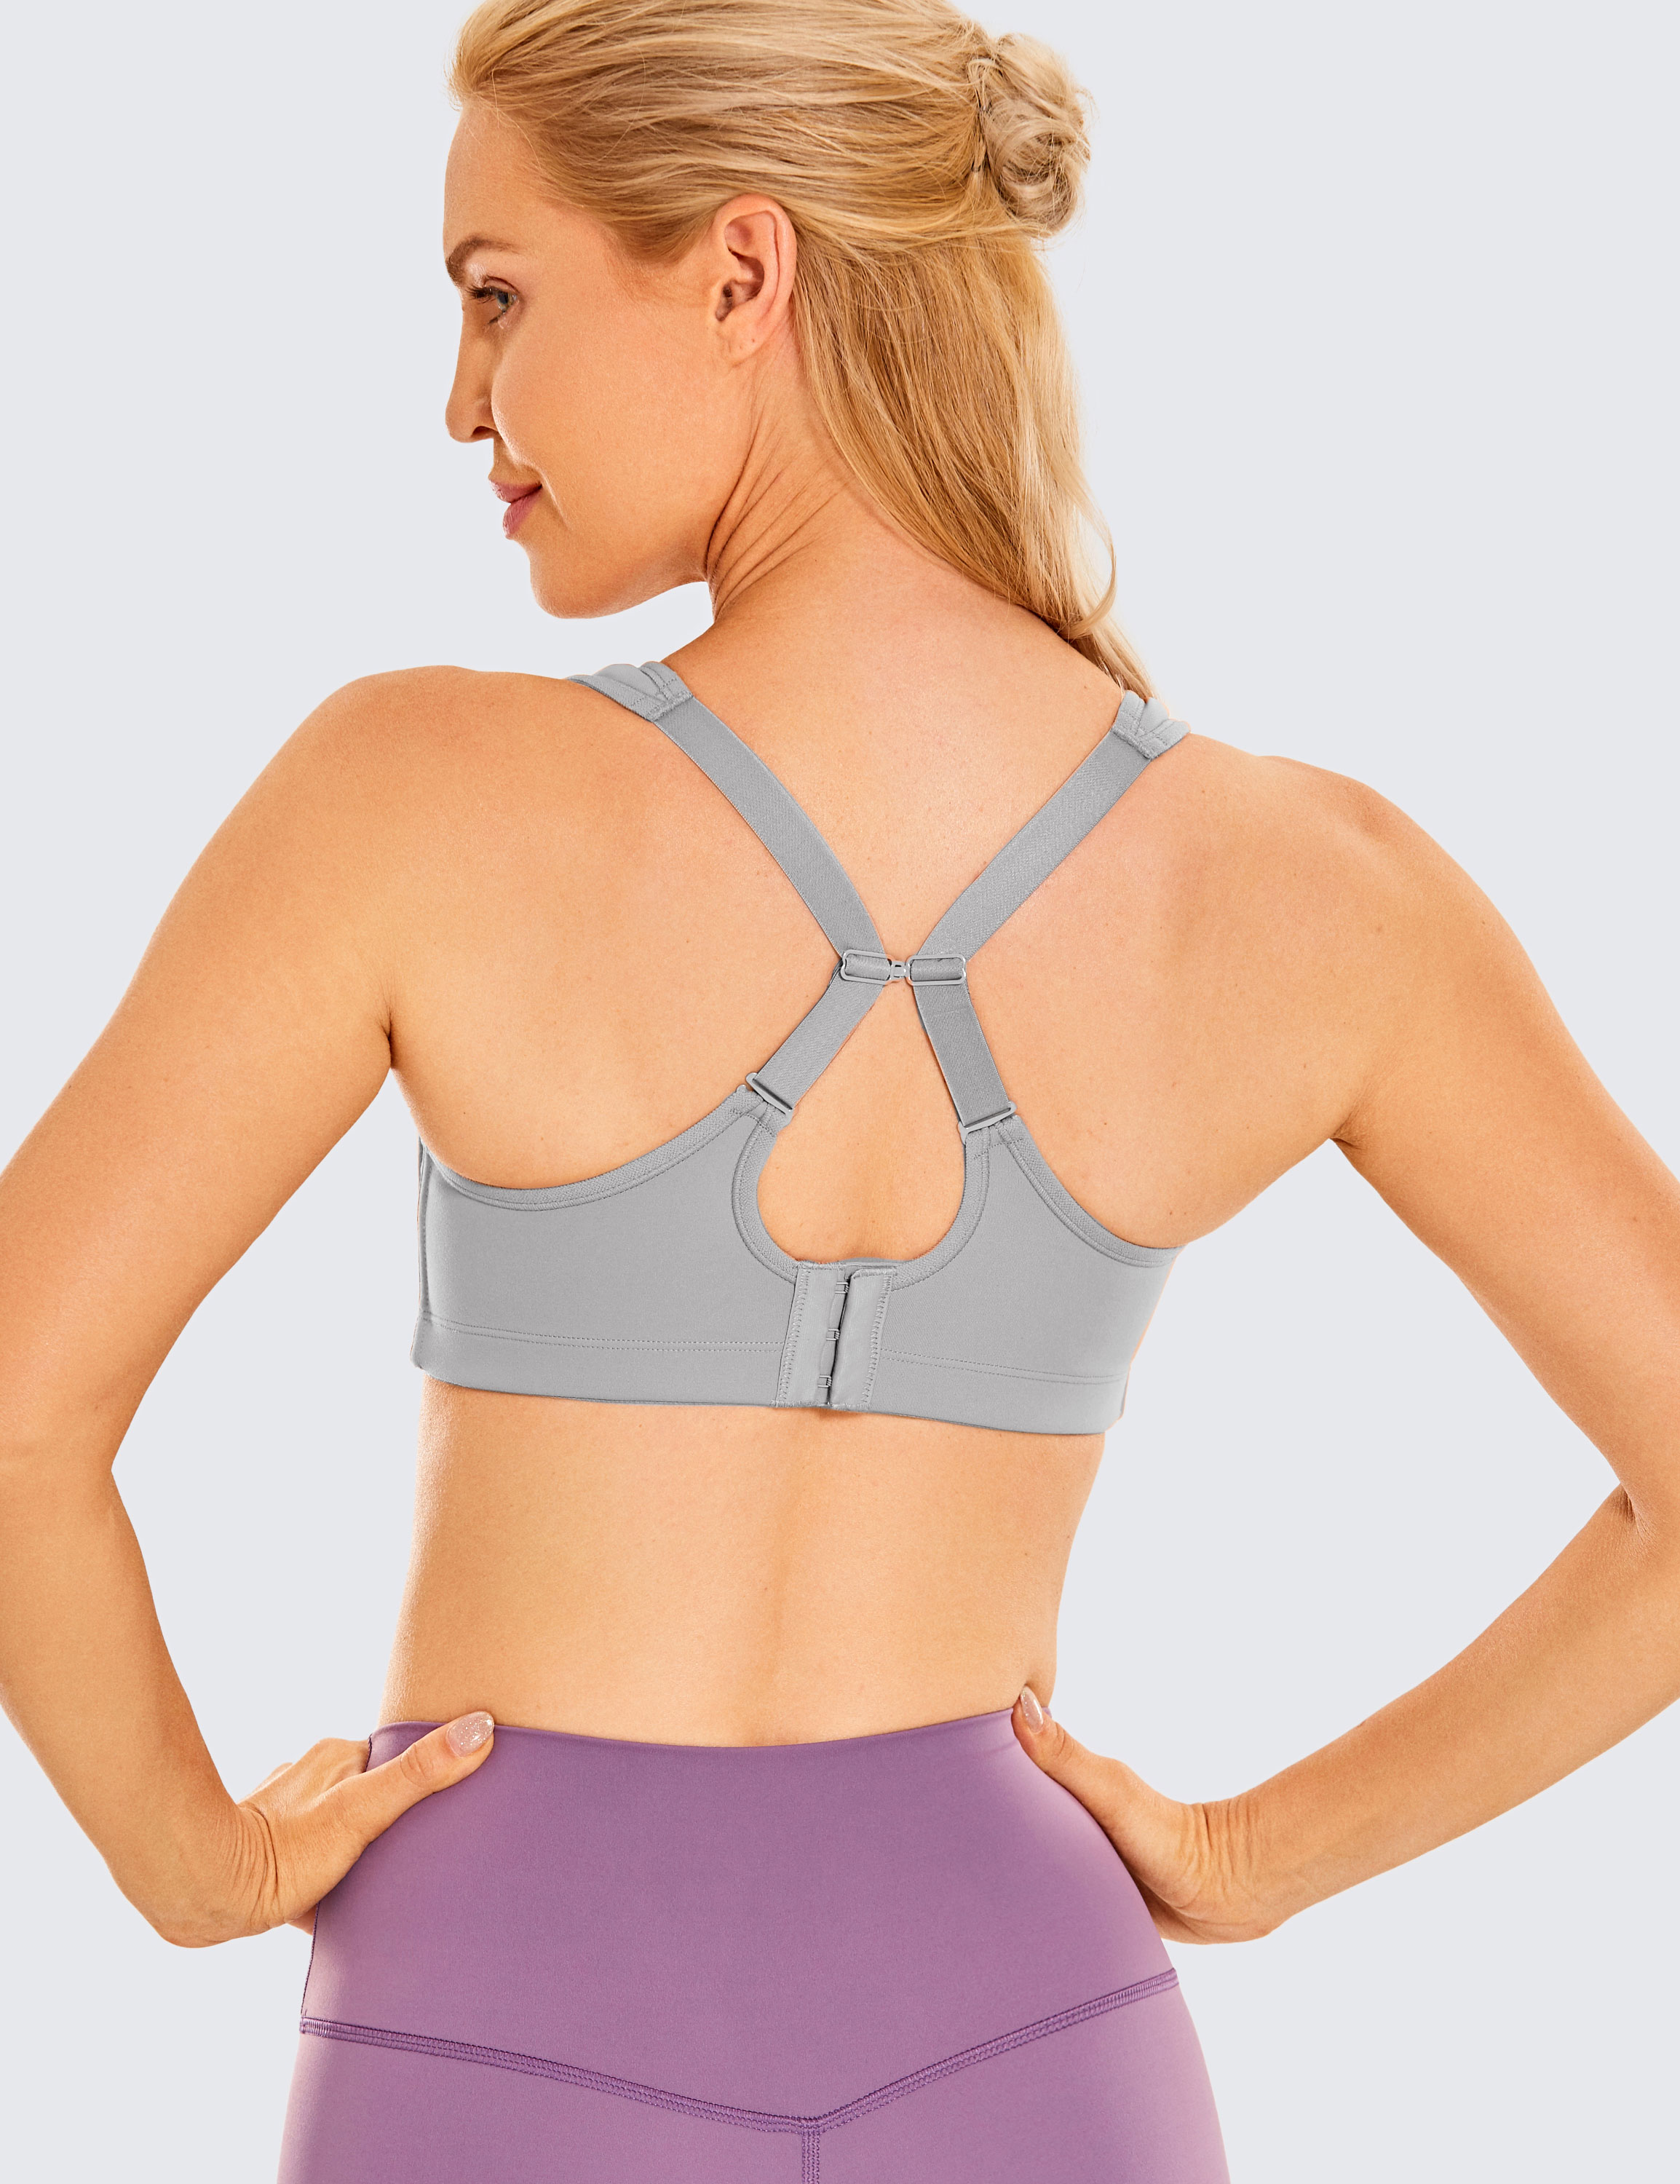 Voncos Sports Bra on Clearance- Women's Breasted Back Women's